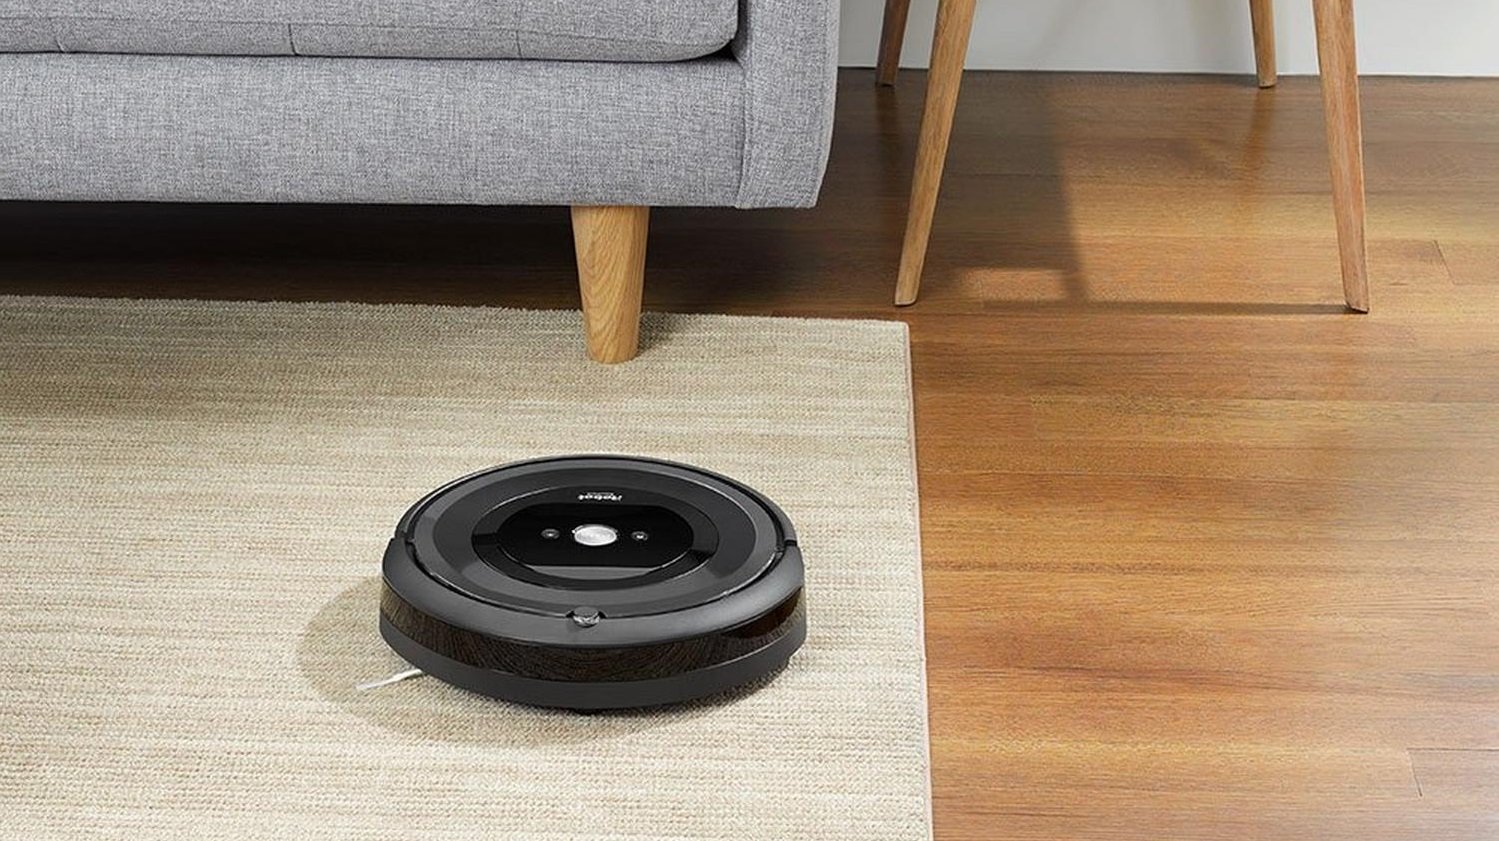 Best Roomba Vacuums In 2021 Imore, Best Roomba For Laminate Floors